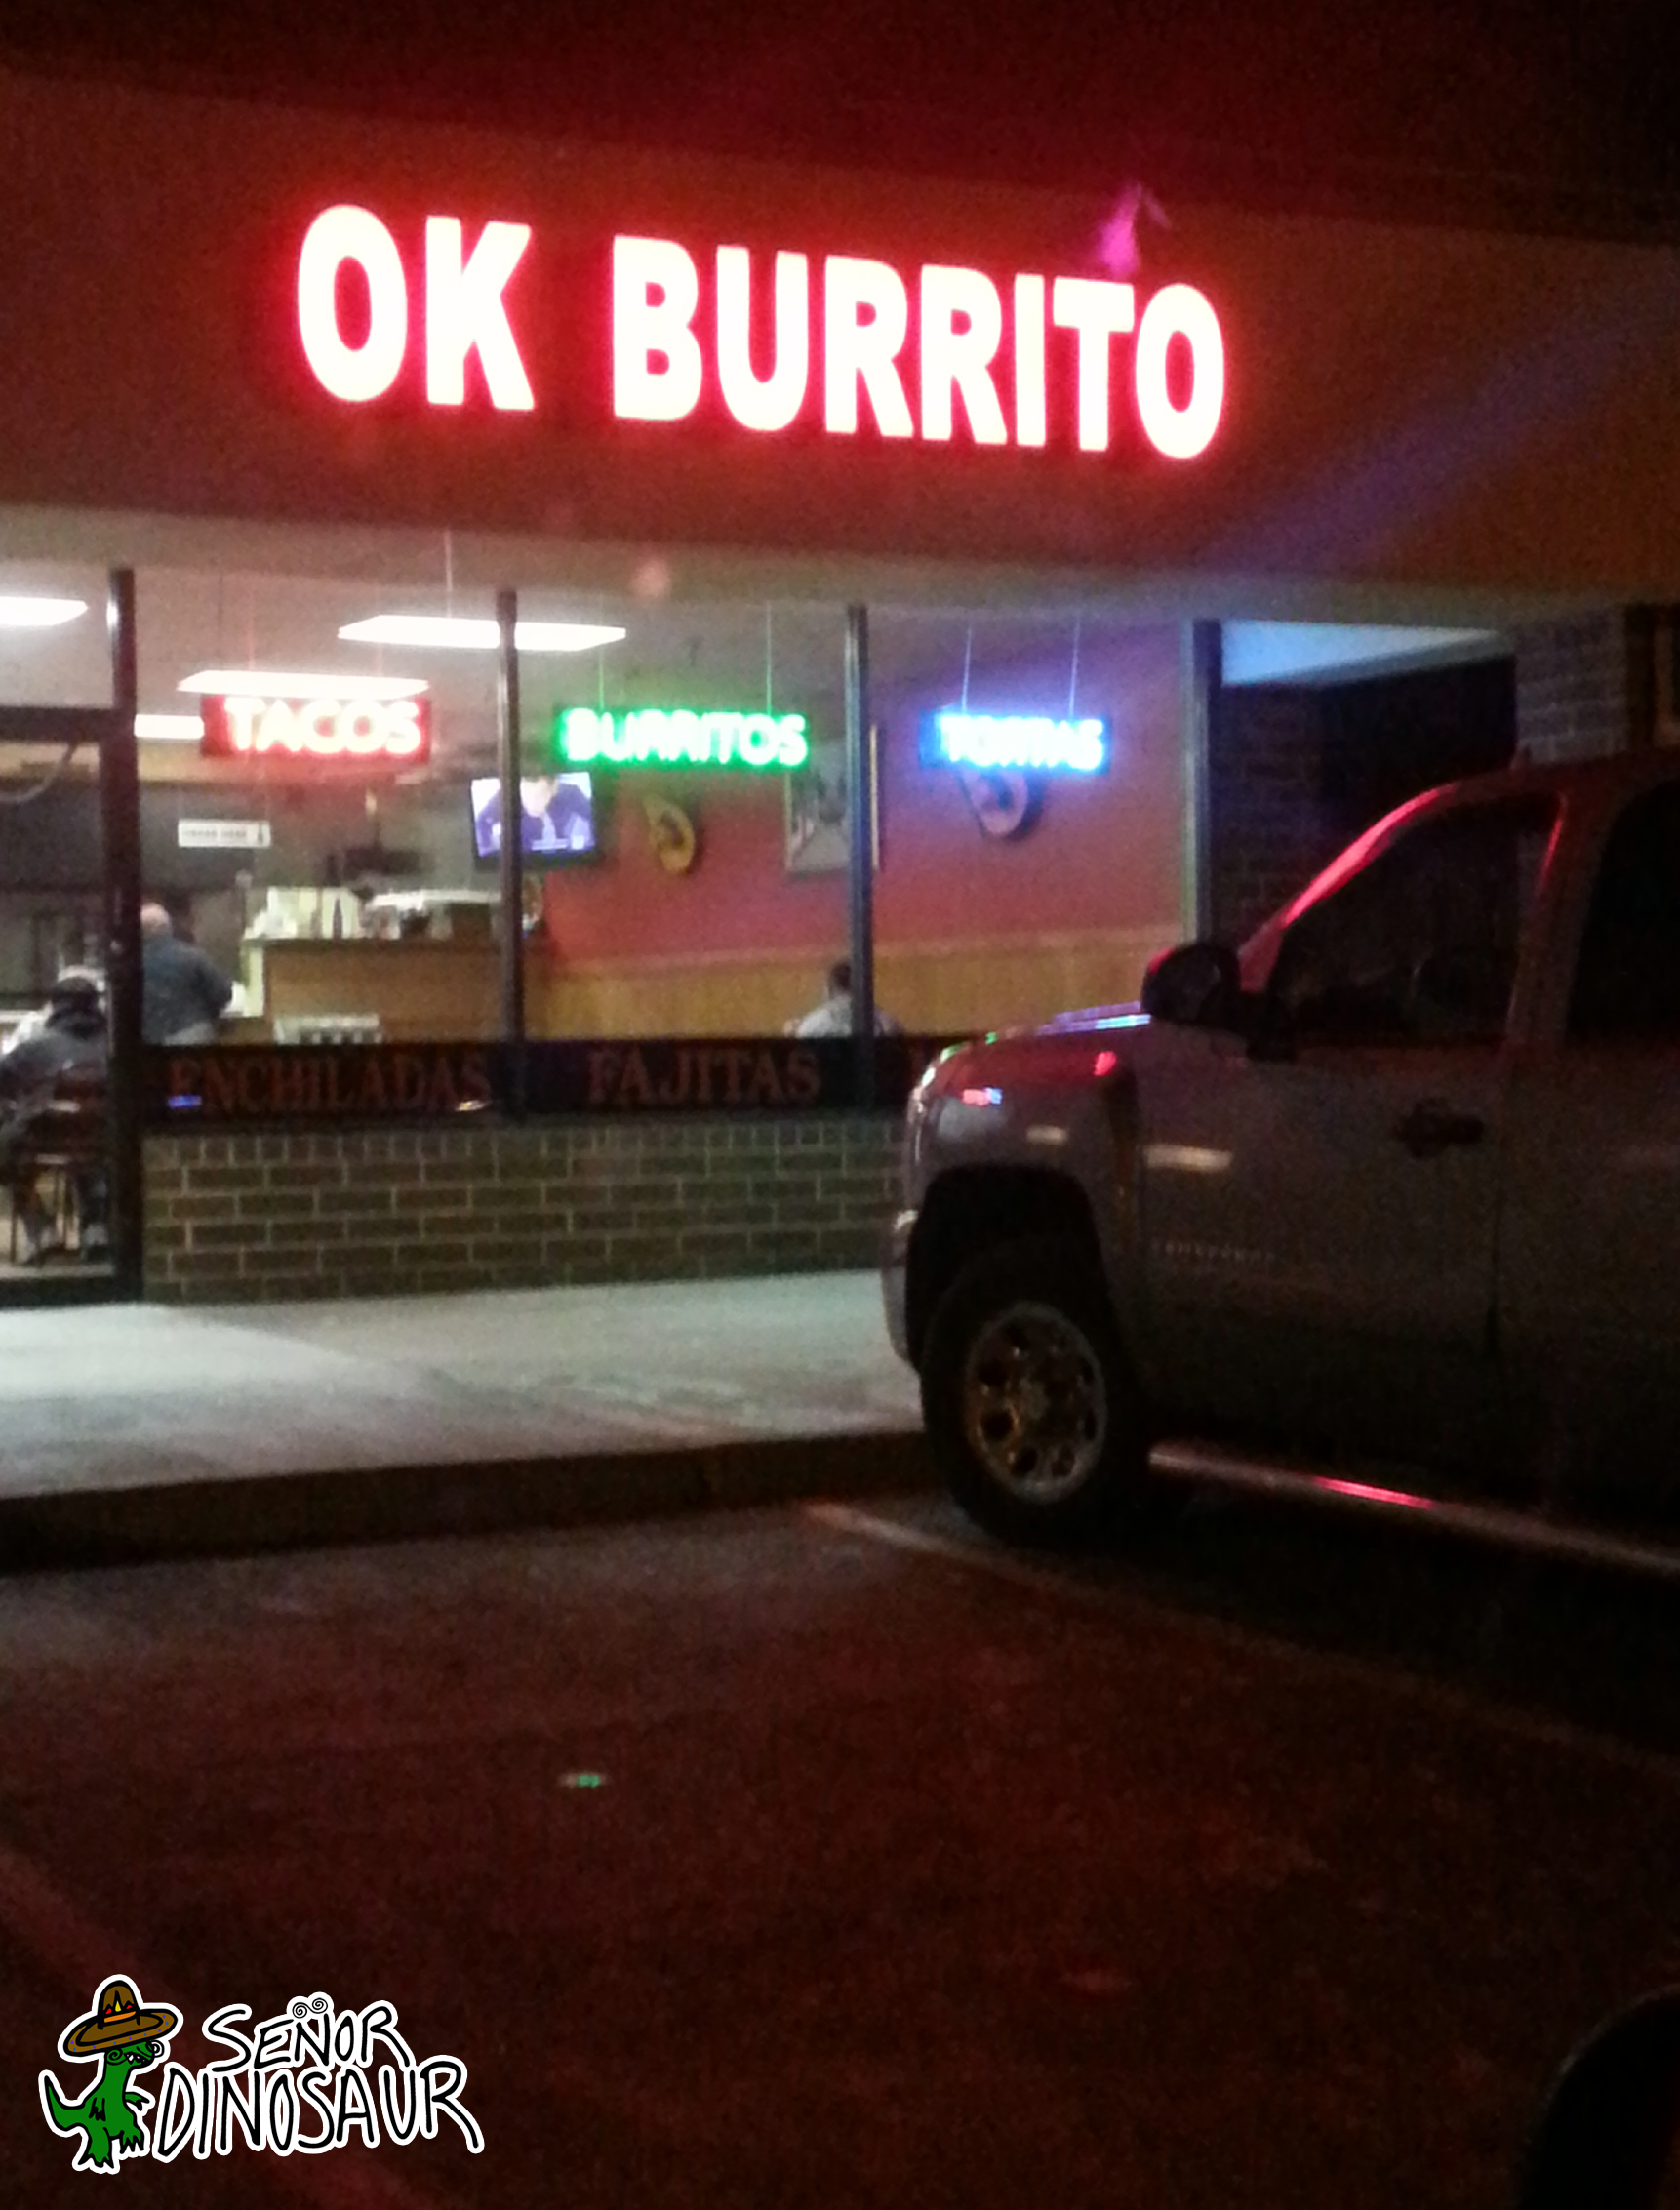 This isn't the worst name for a burrito place, but it's not the best either. It's just kind of ok.